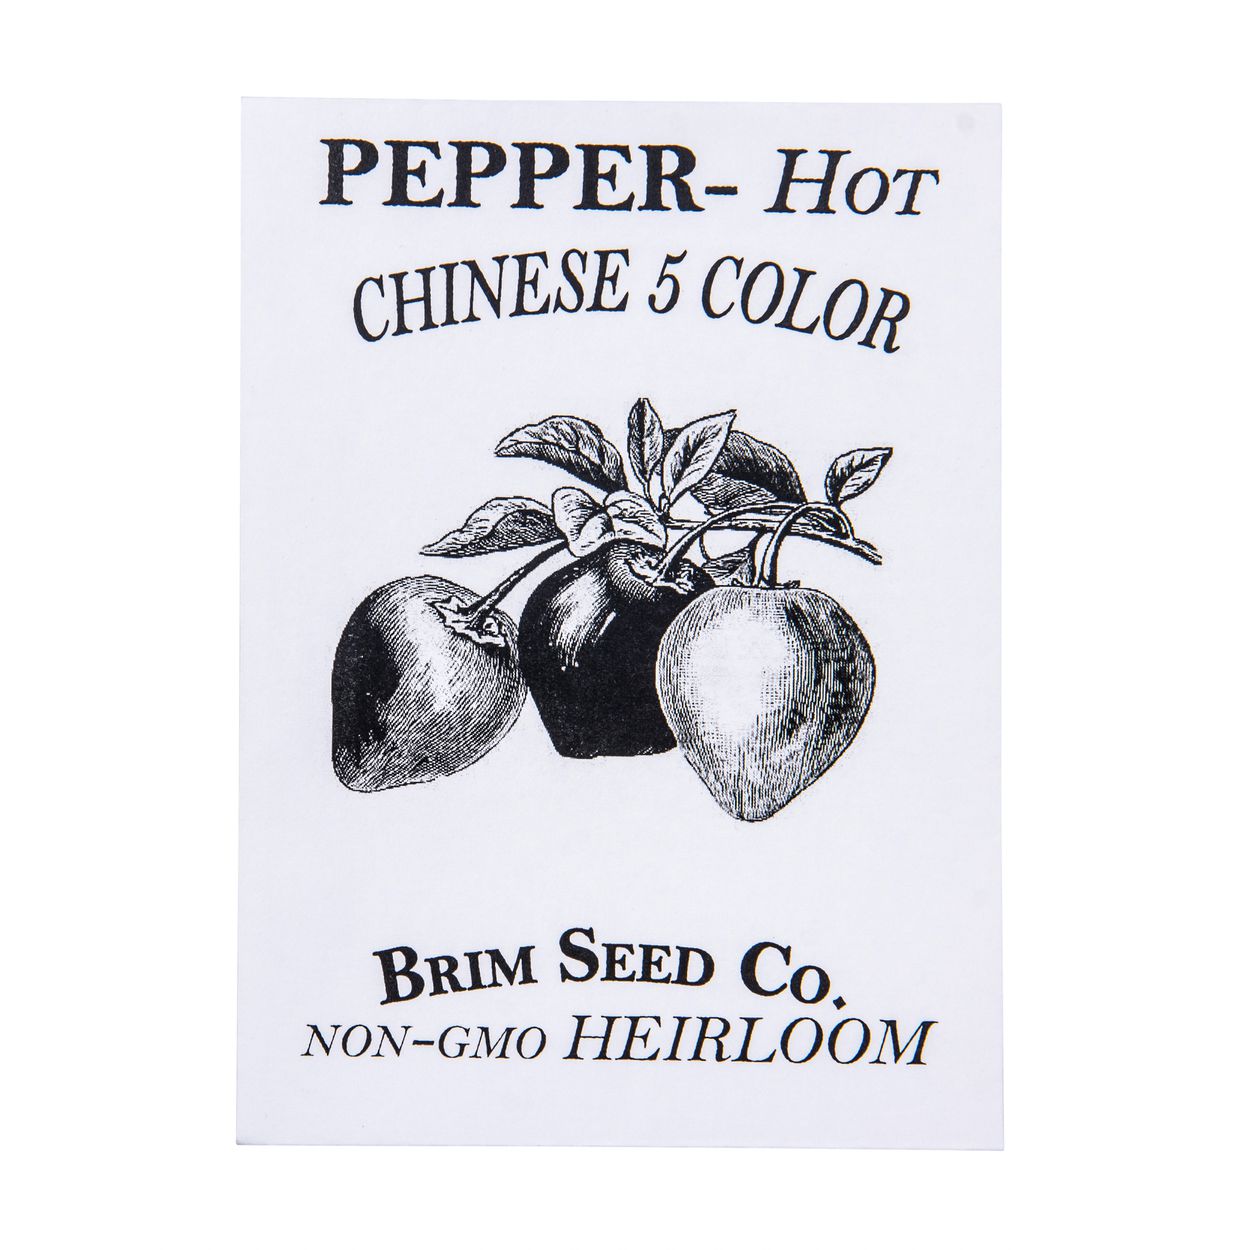 Brim Seed Co. - Hot Chinese 5 Color Pepper Heirloom Seed